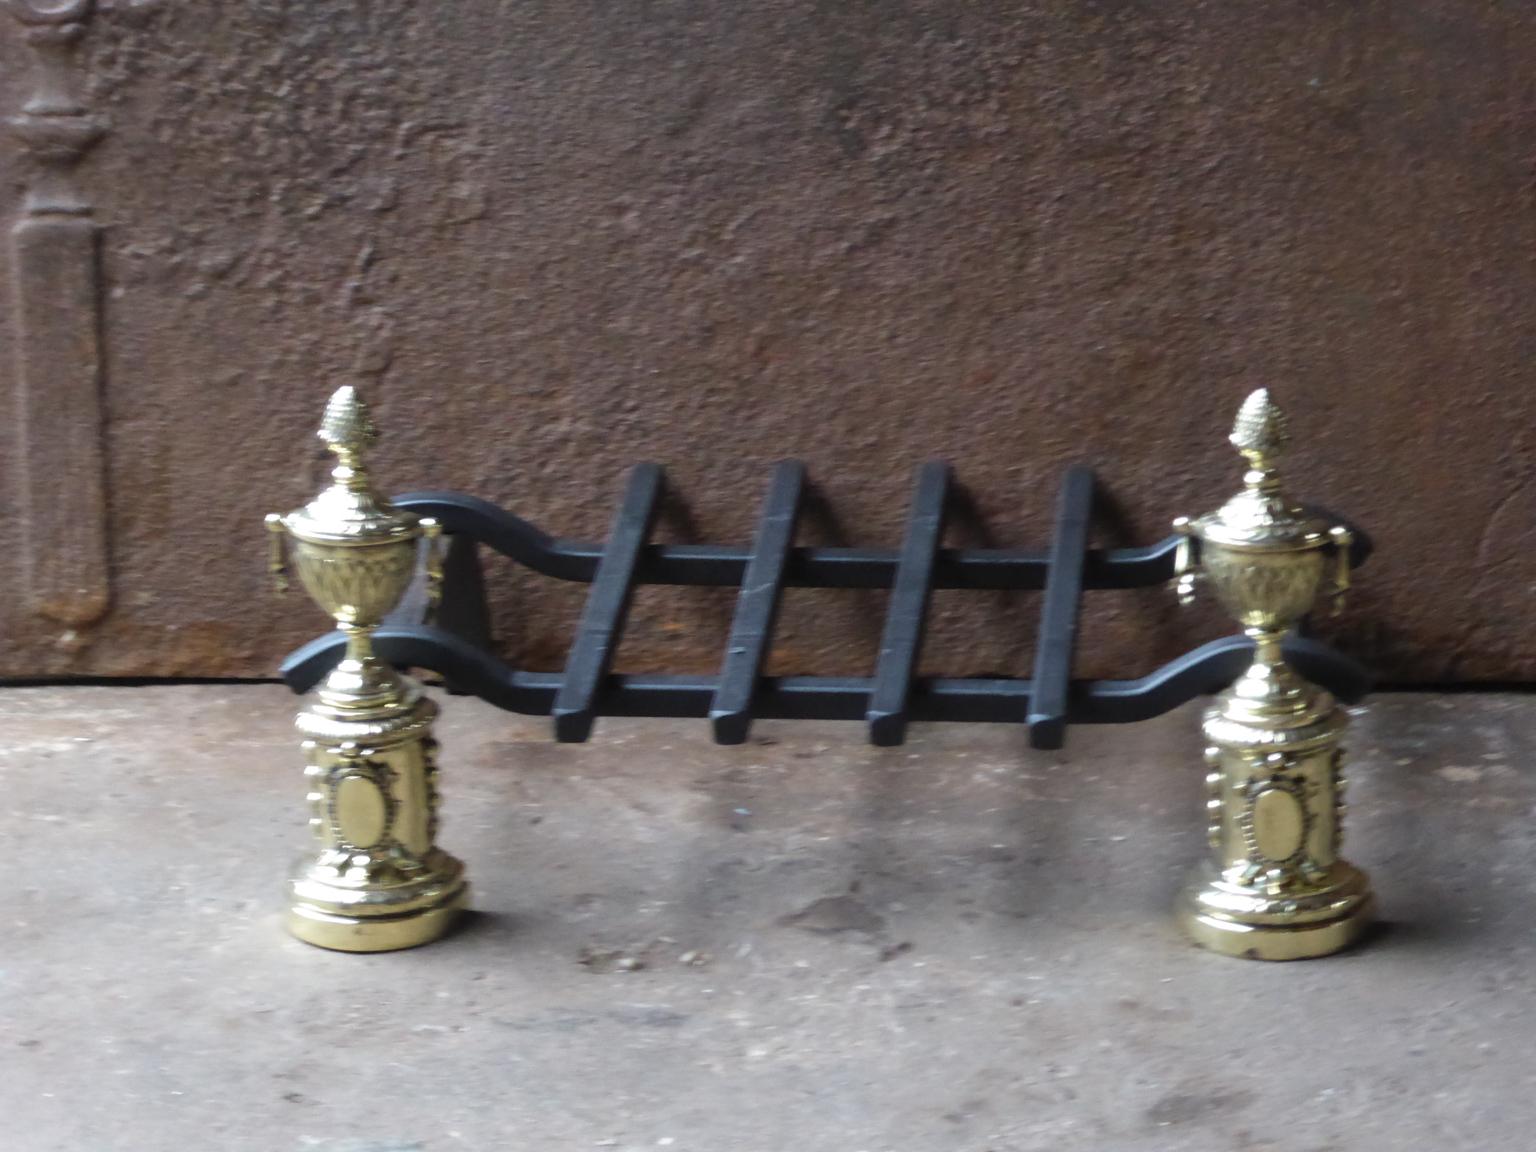 20th century French Napoleon III style fireplace basket - fire basket made of wrought iron and polished brass. The basket is in a good condition and is fully functional.